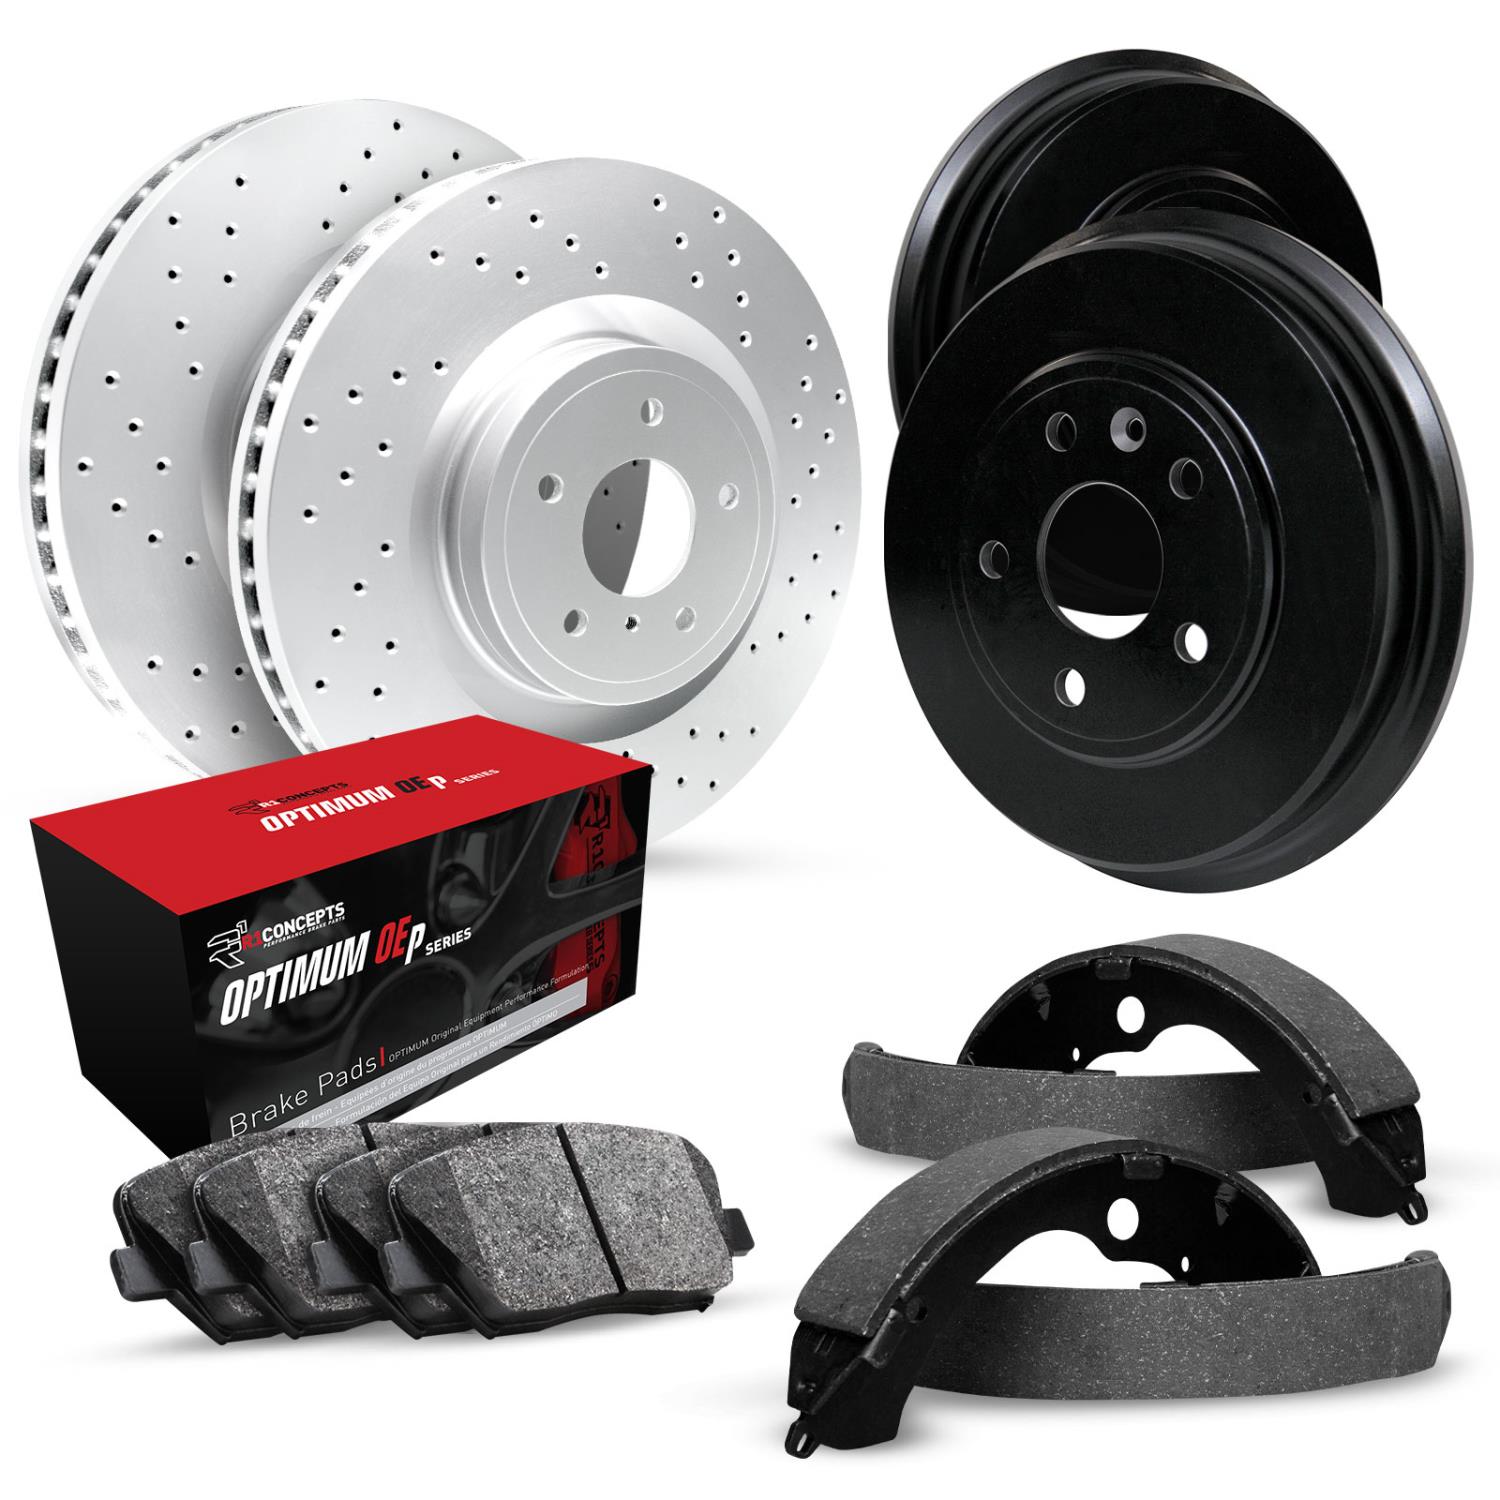 GEO-Carbon Drilled Brake Rotor & Drum Set w/Optimum OE Pads & Shoes, 1982-1992 GM, Position: Front & Rear